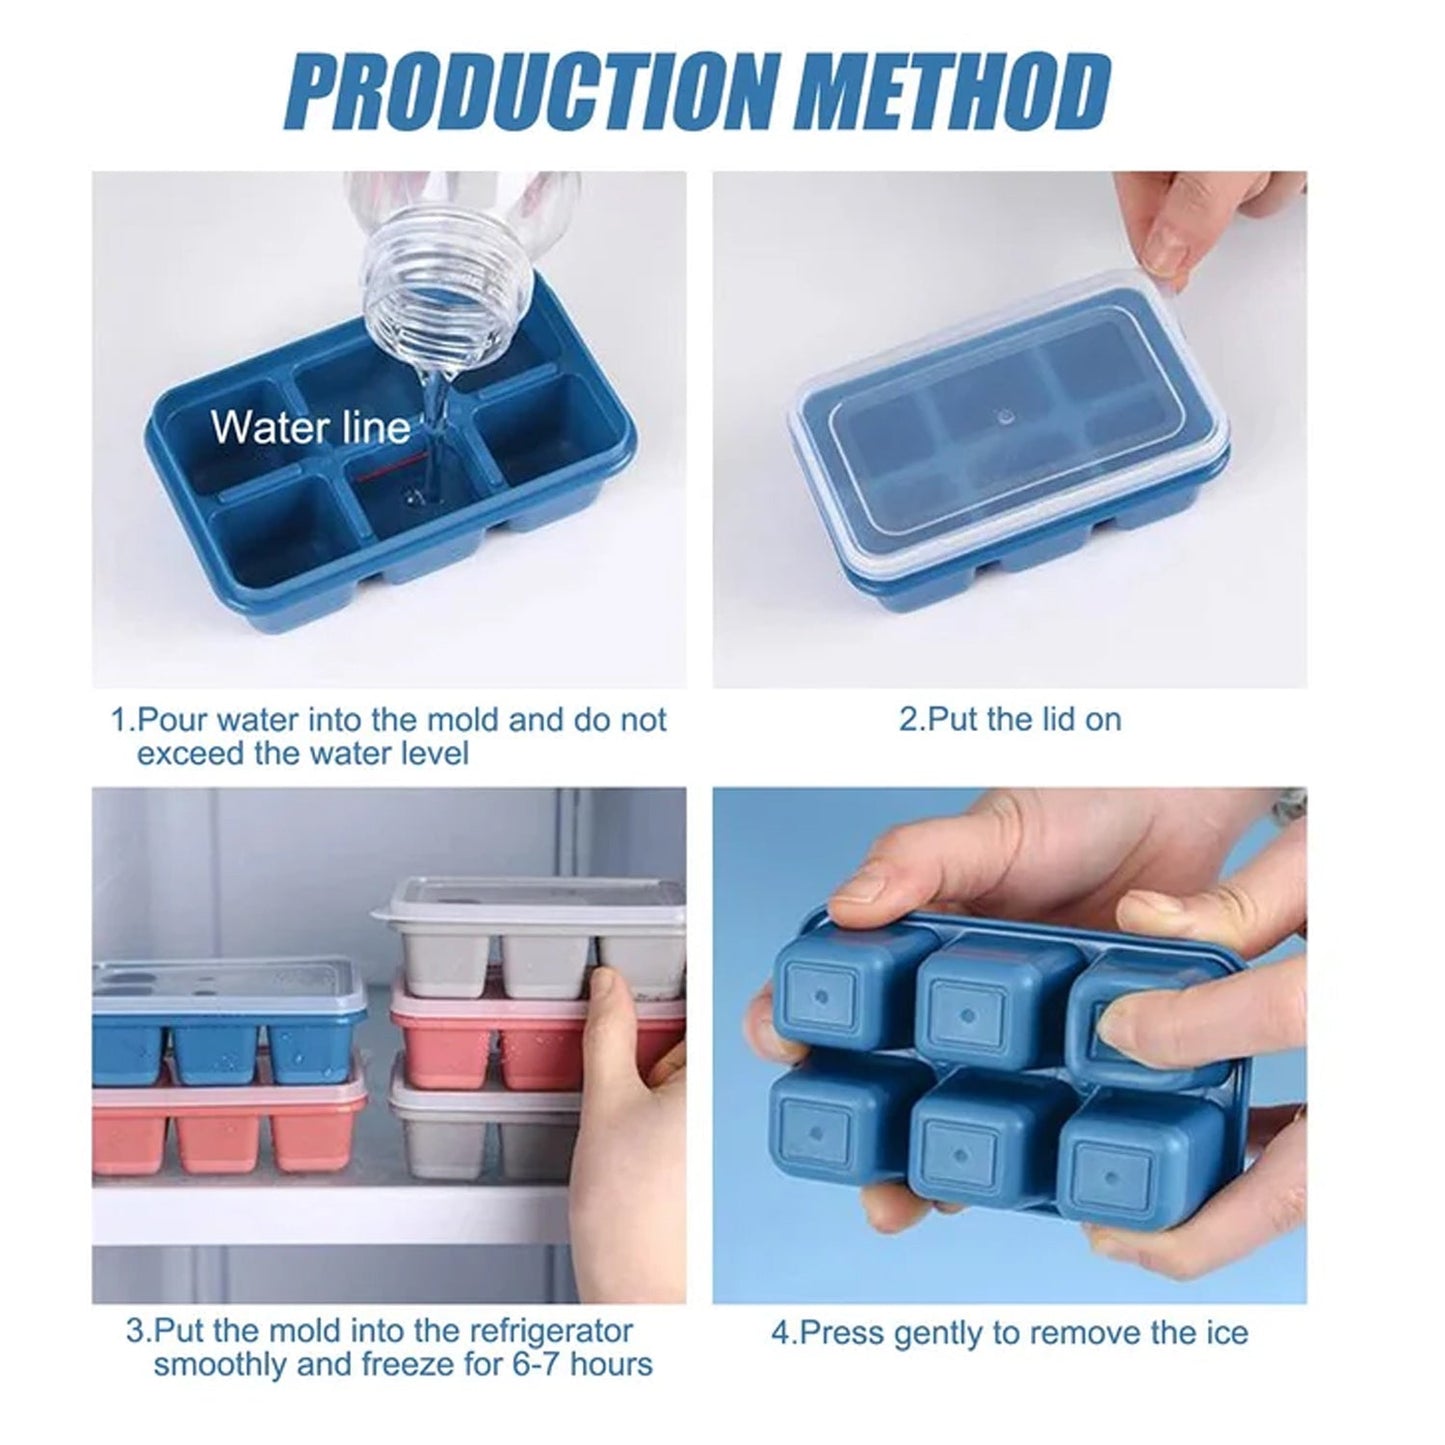 4750 6 cavity Silicone Ice Tray used in all kinds of places like household kitchens for making ice from water and various things and all.